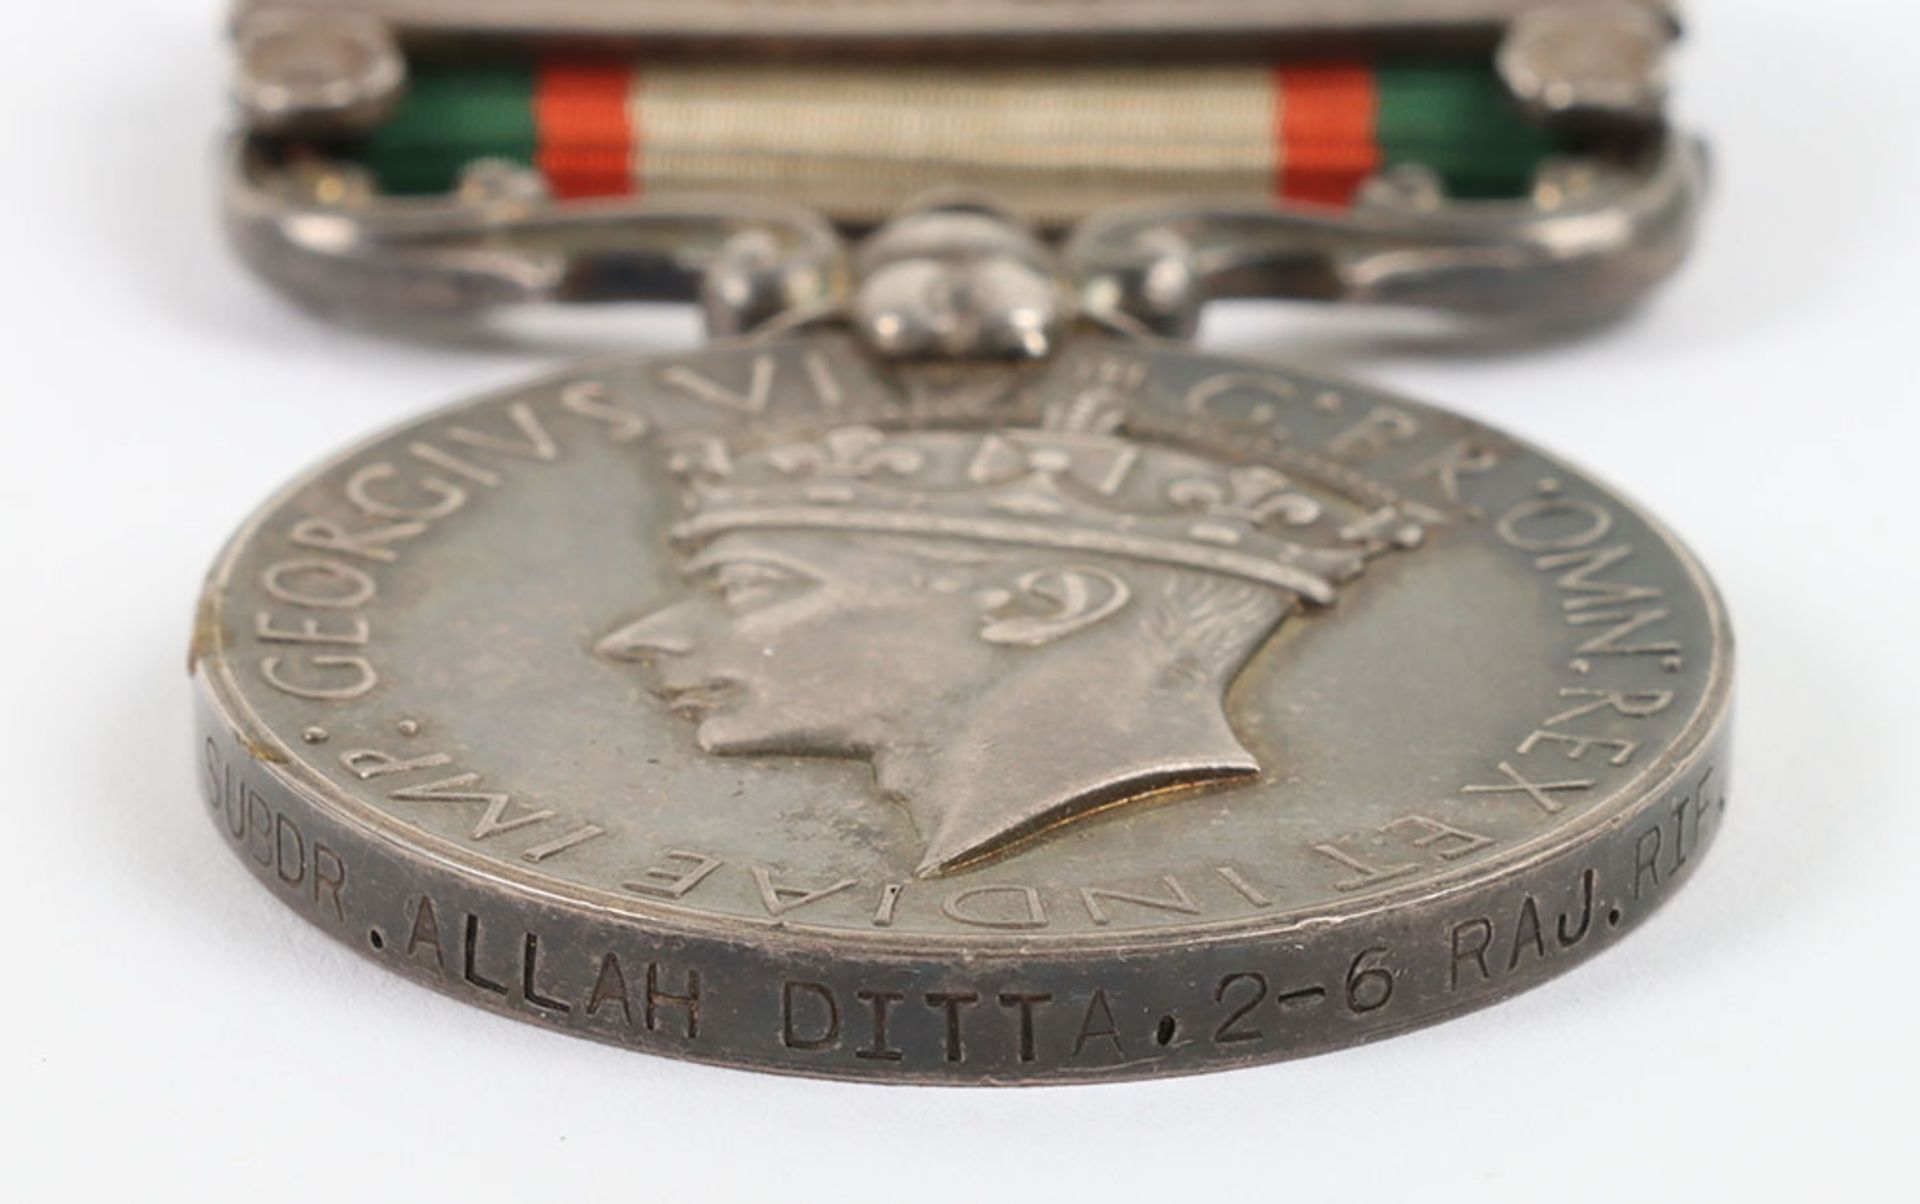 India General Service medal 1936-39 Rajput Rifles - Image 2 of 4